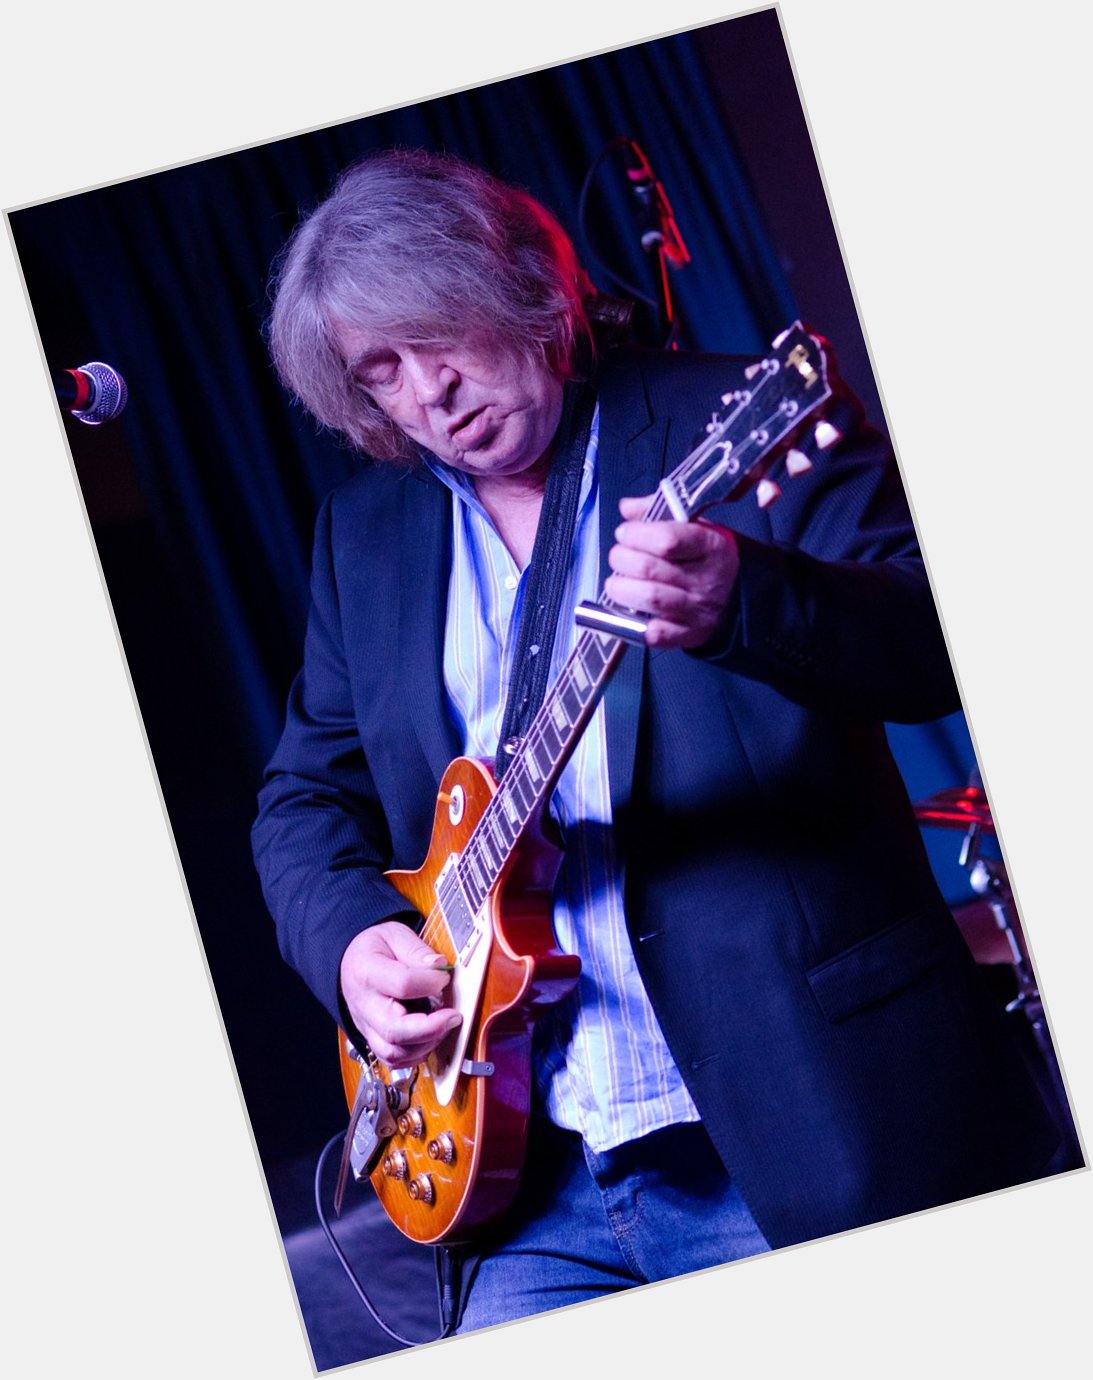 Please join me here at in wishing the one and only Mick Taylor a very Happy 72nd Birthday today  